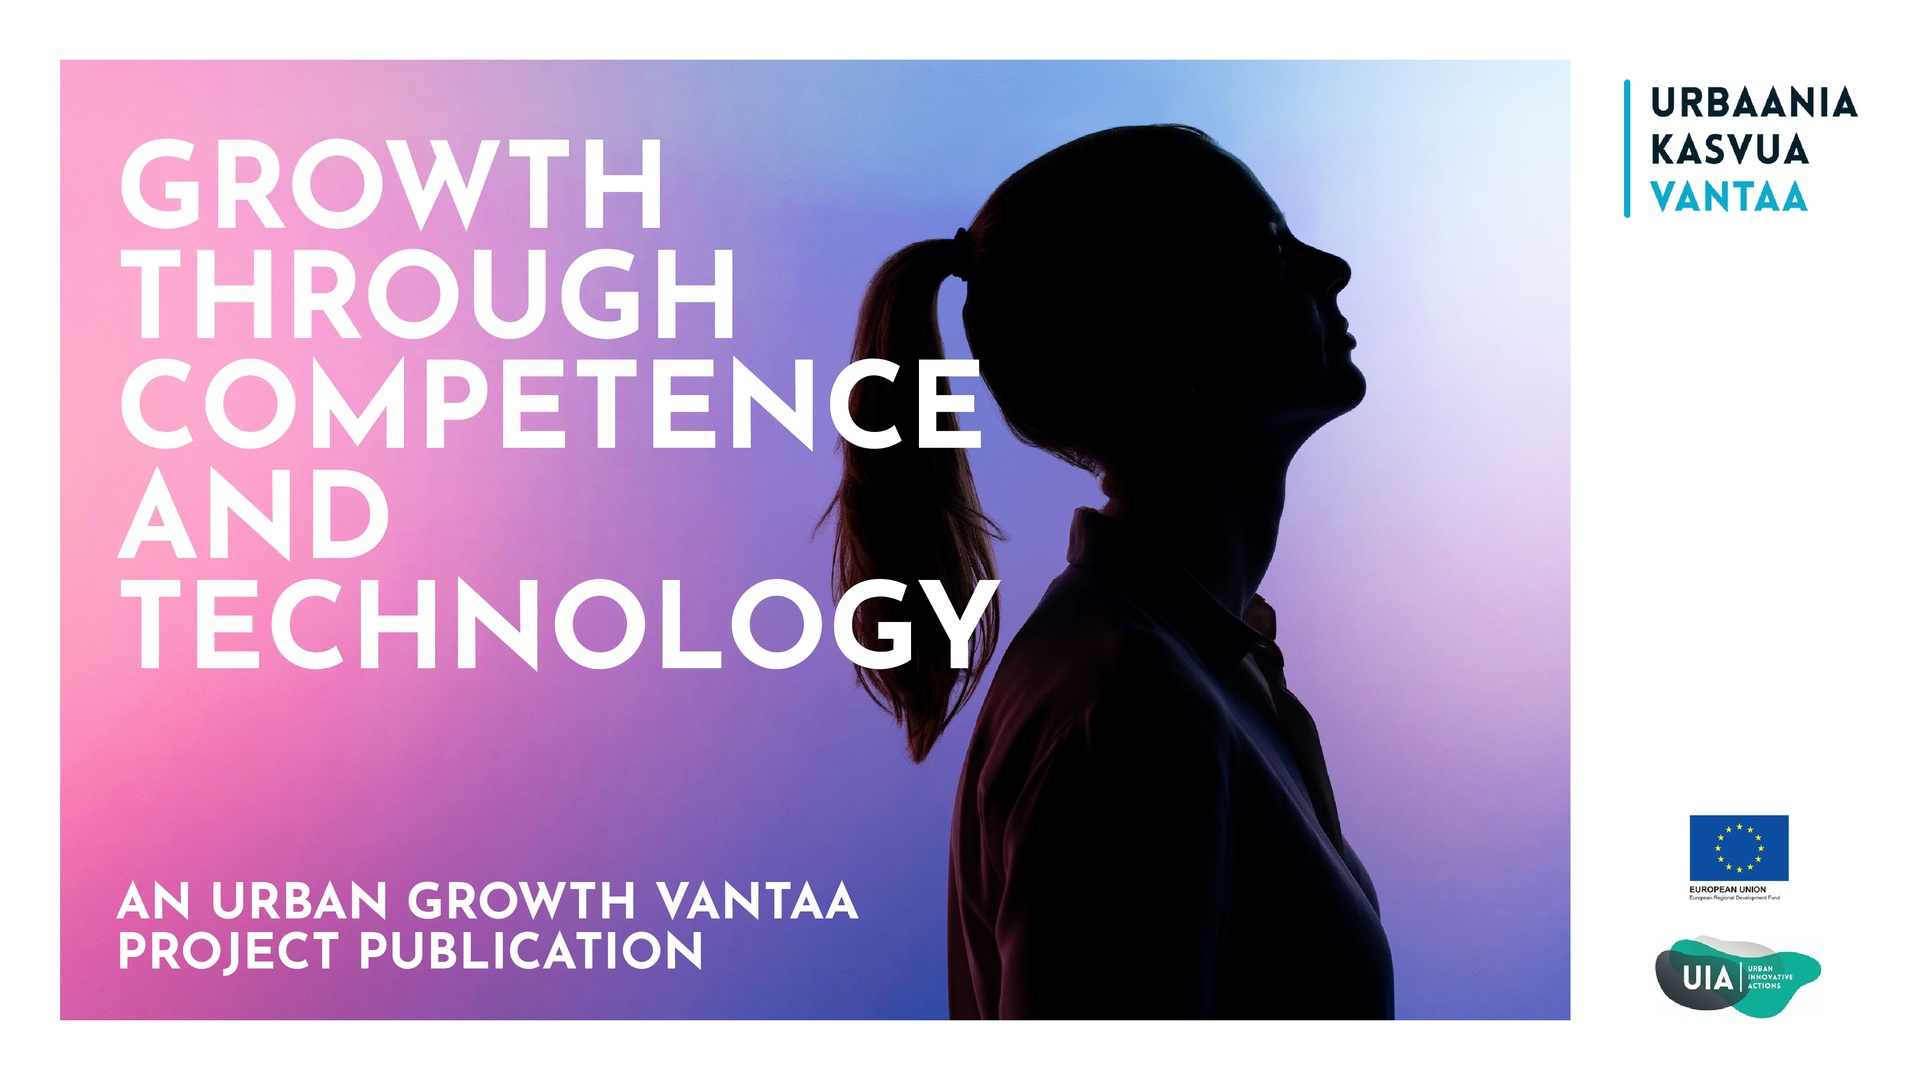 GROWTH THROUGH COMPETENCE AND TECHNOLOGY